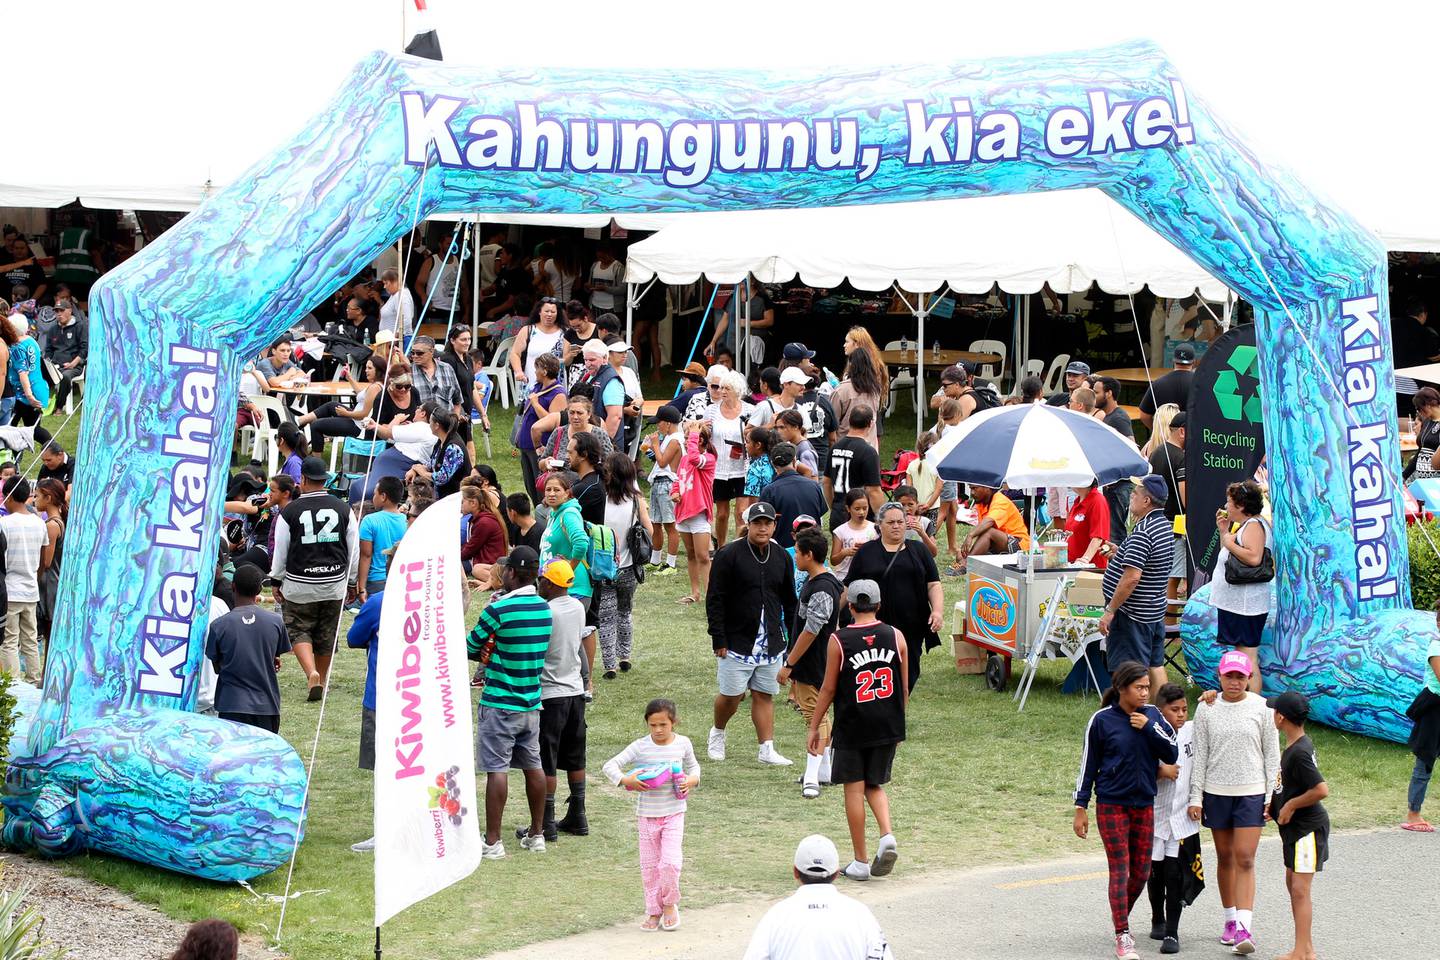 Waitangi Day Three events give something for everyone in Hawke's Bay